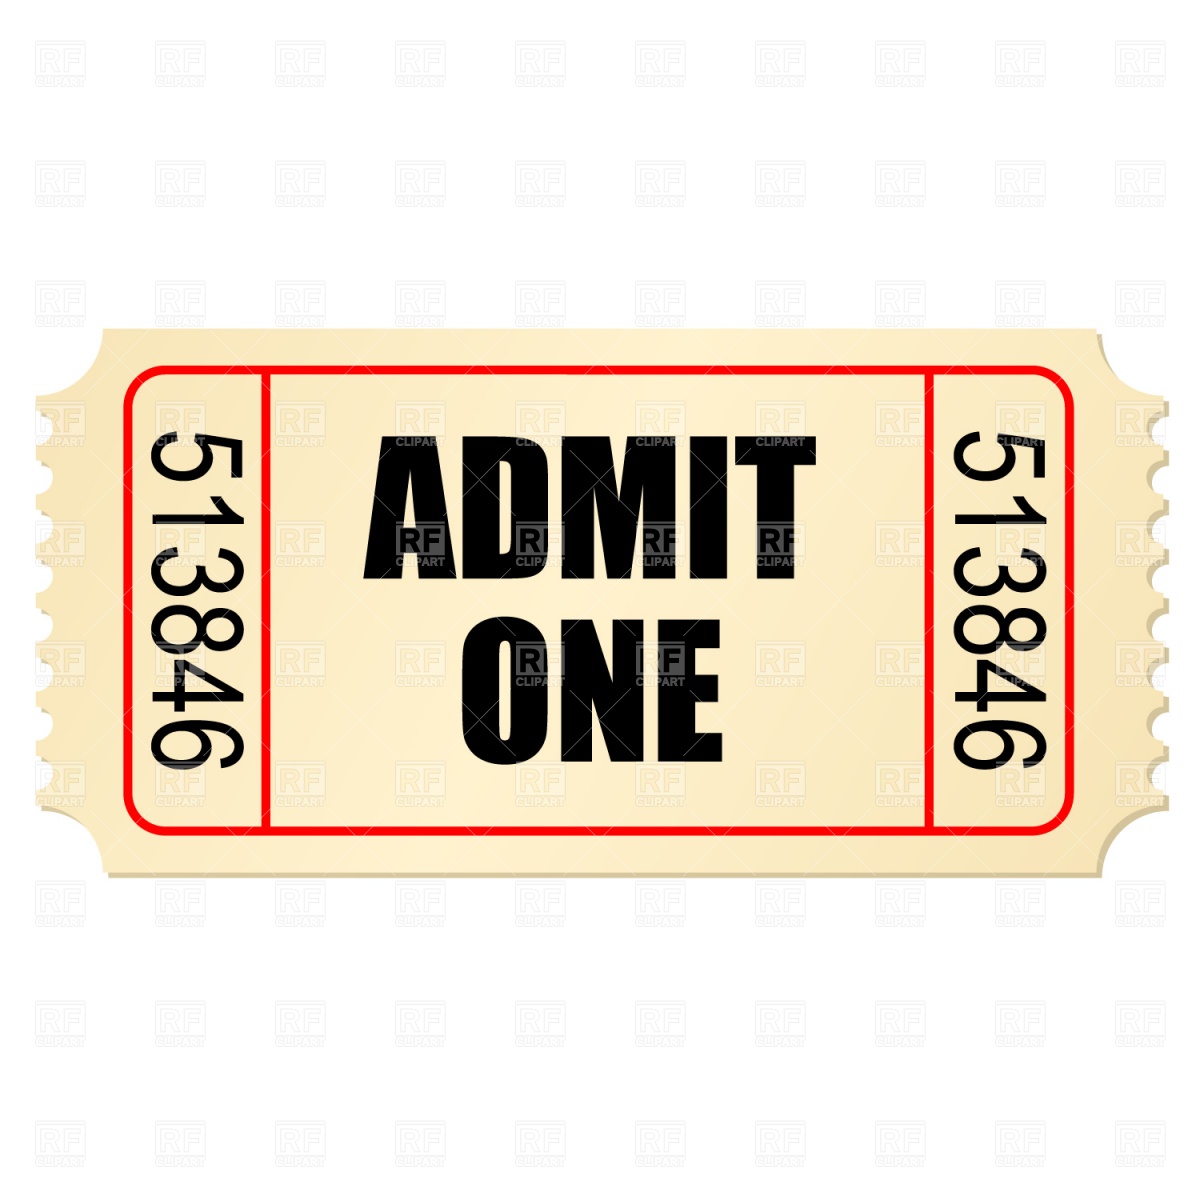 Movie Ticket Stub 881 Objects Download Royalty Free Vector Clipart